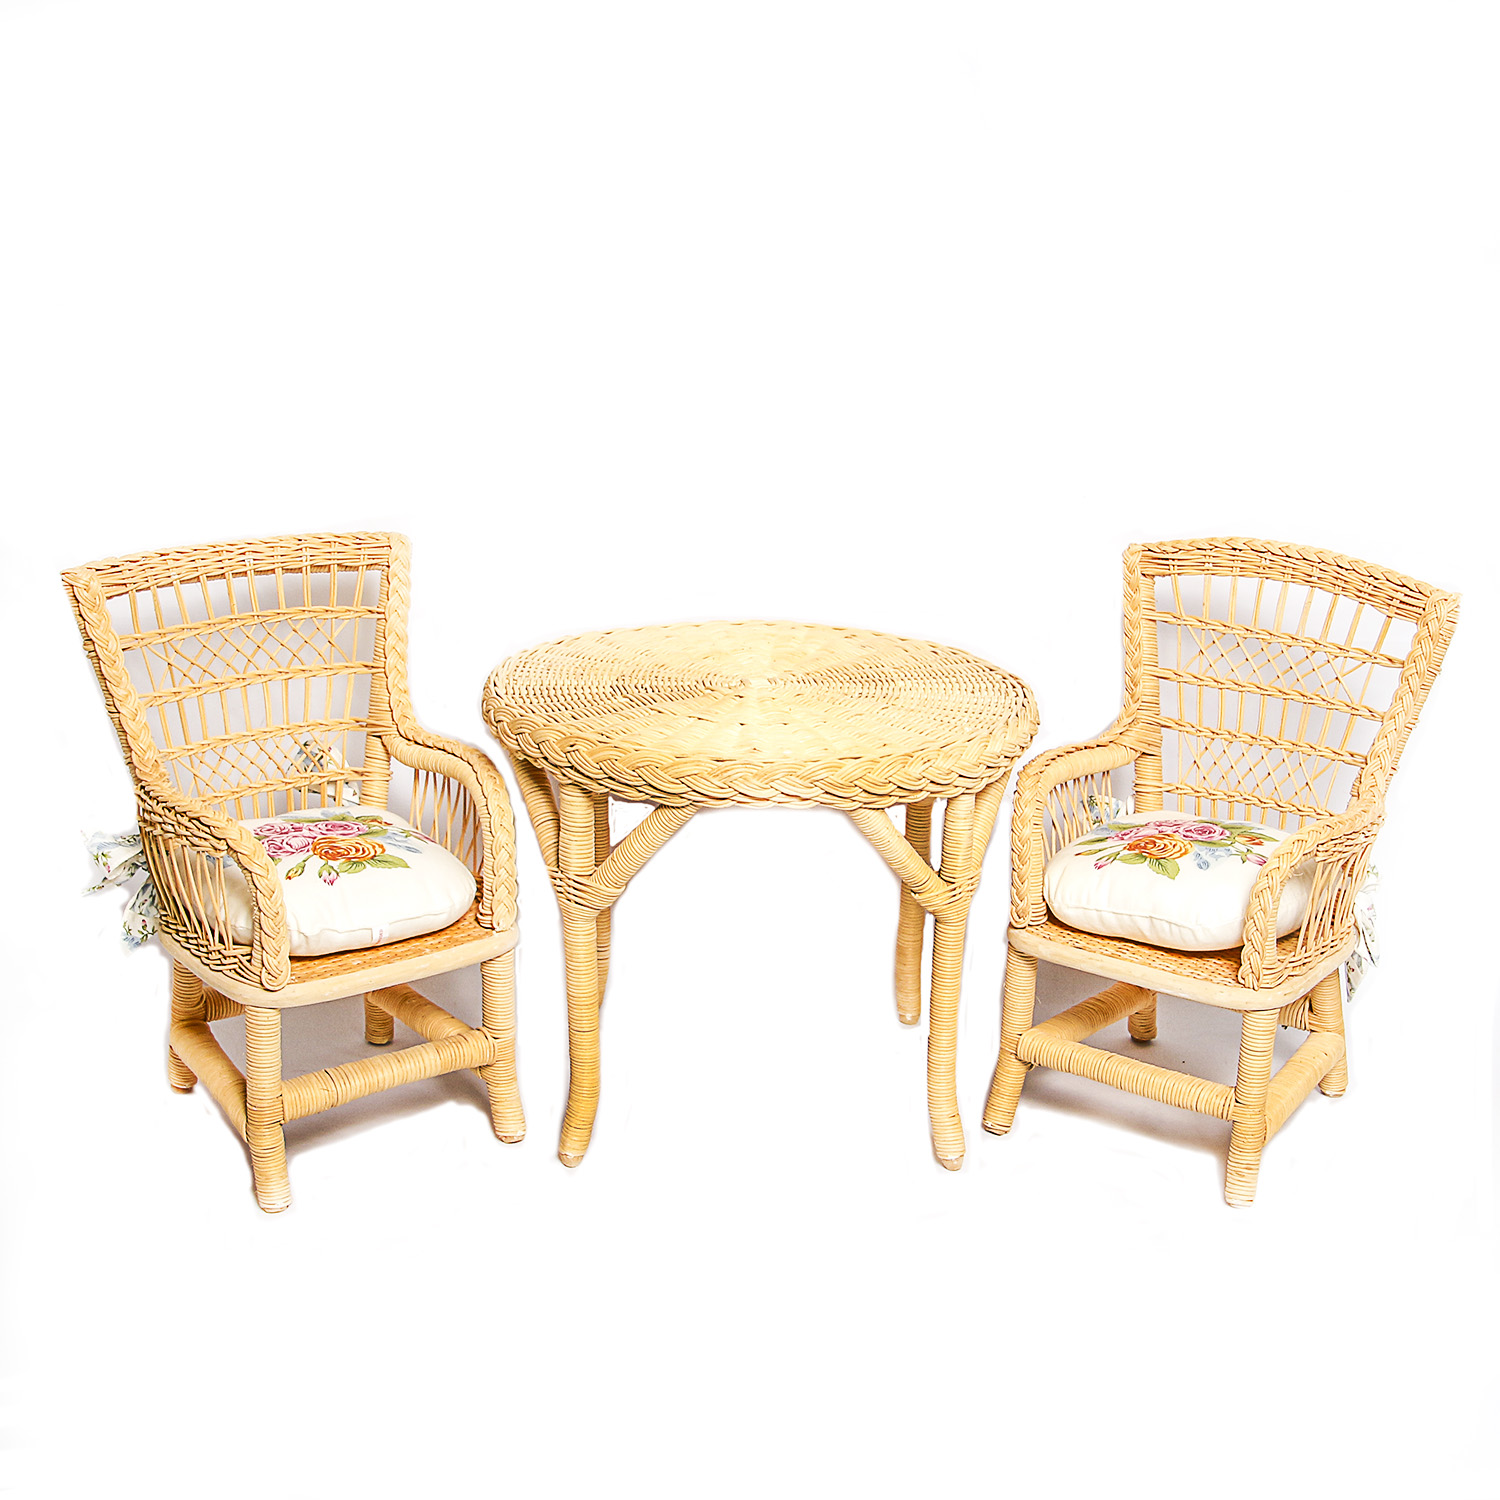 american girl doll wicker table and chairs